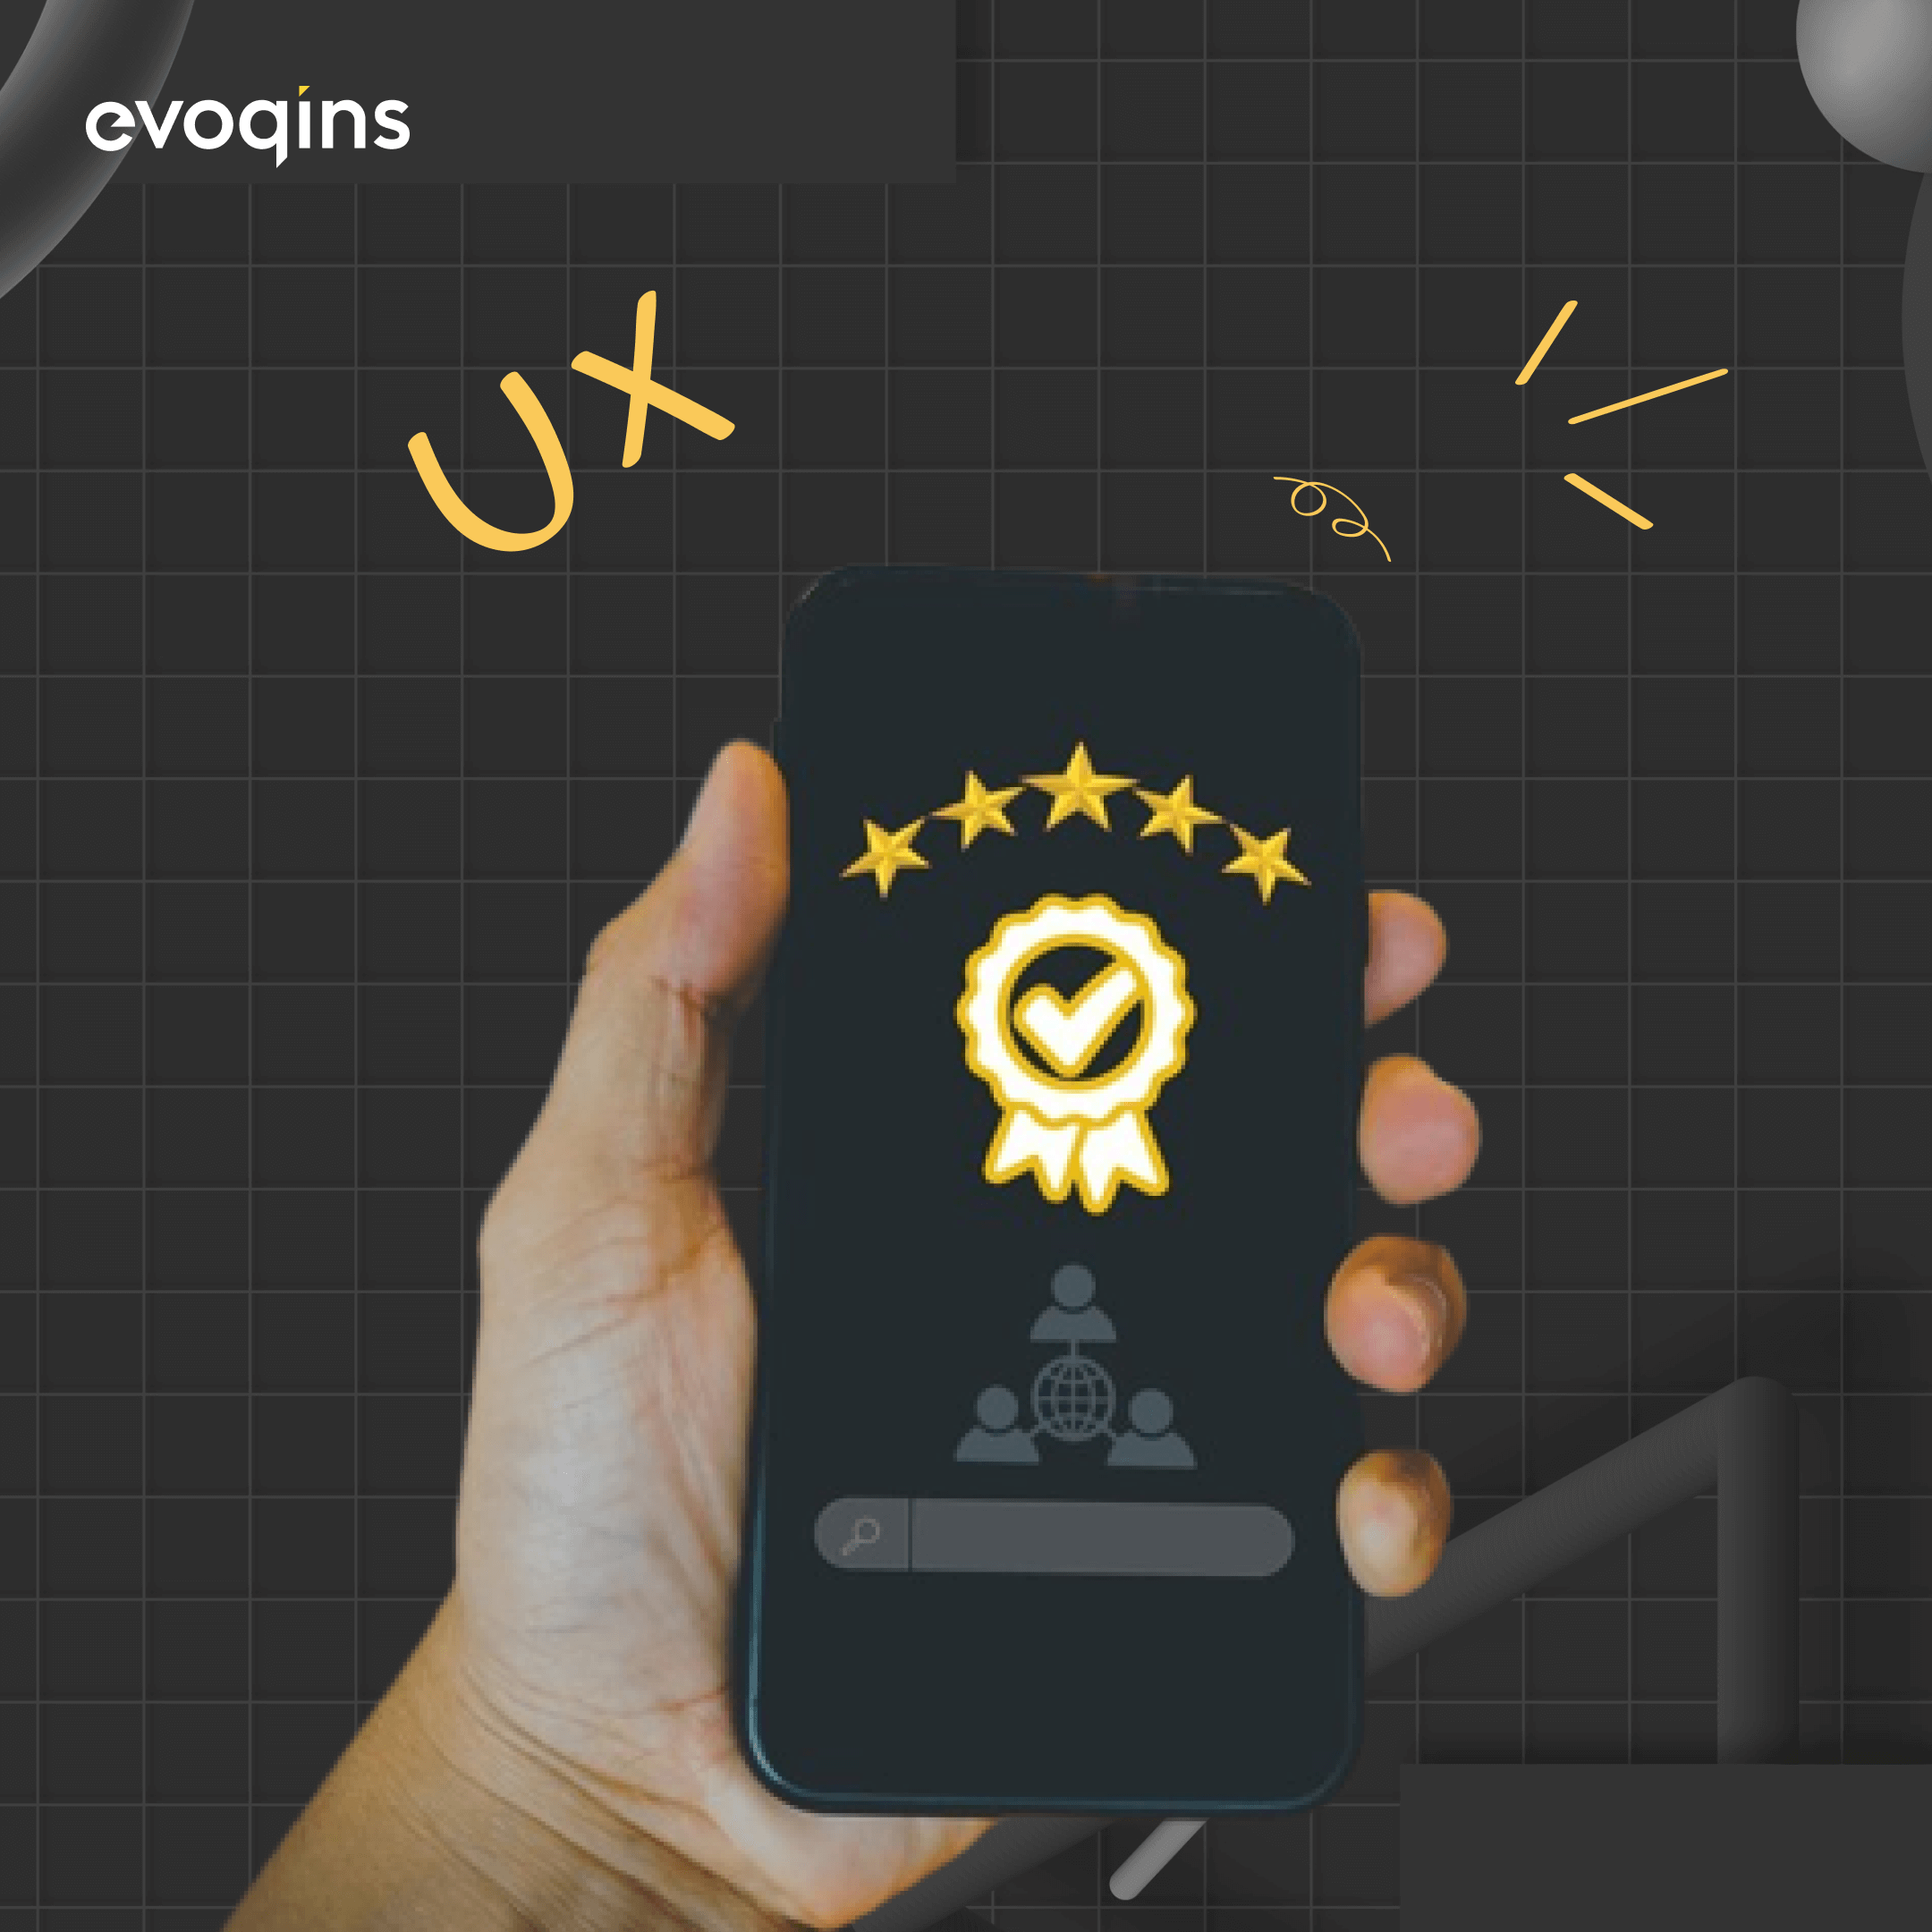 Customer satisfaction through UX design in investment application